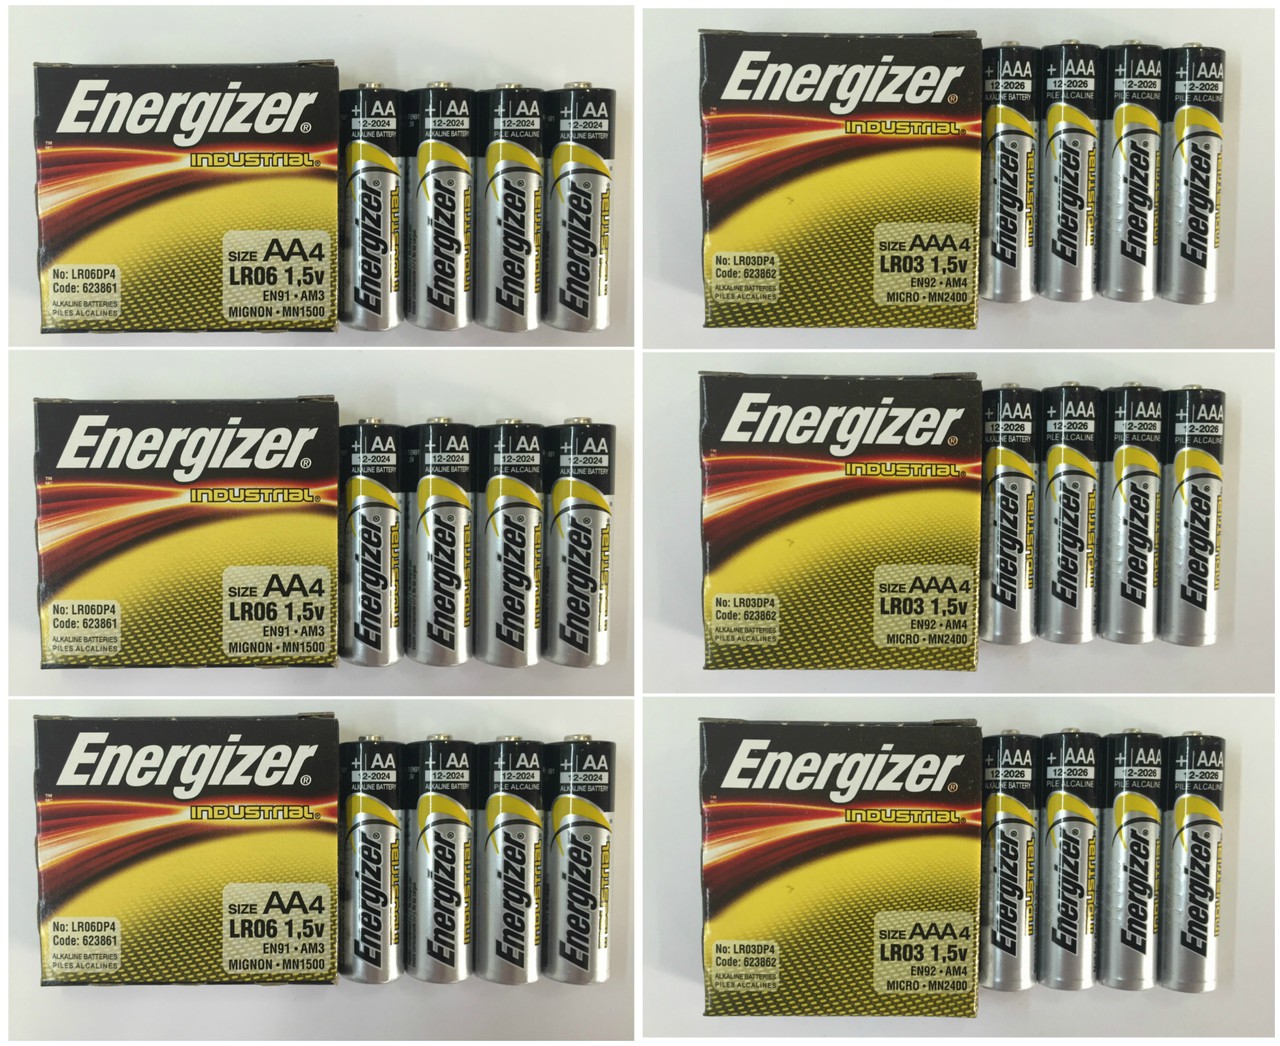 24 Piece Combo Pack - Energizer Industrial Alkaline 12 AAA + 12 AA - FREE SHIPPING!